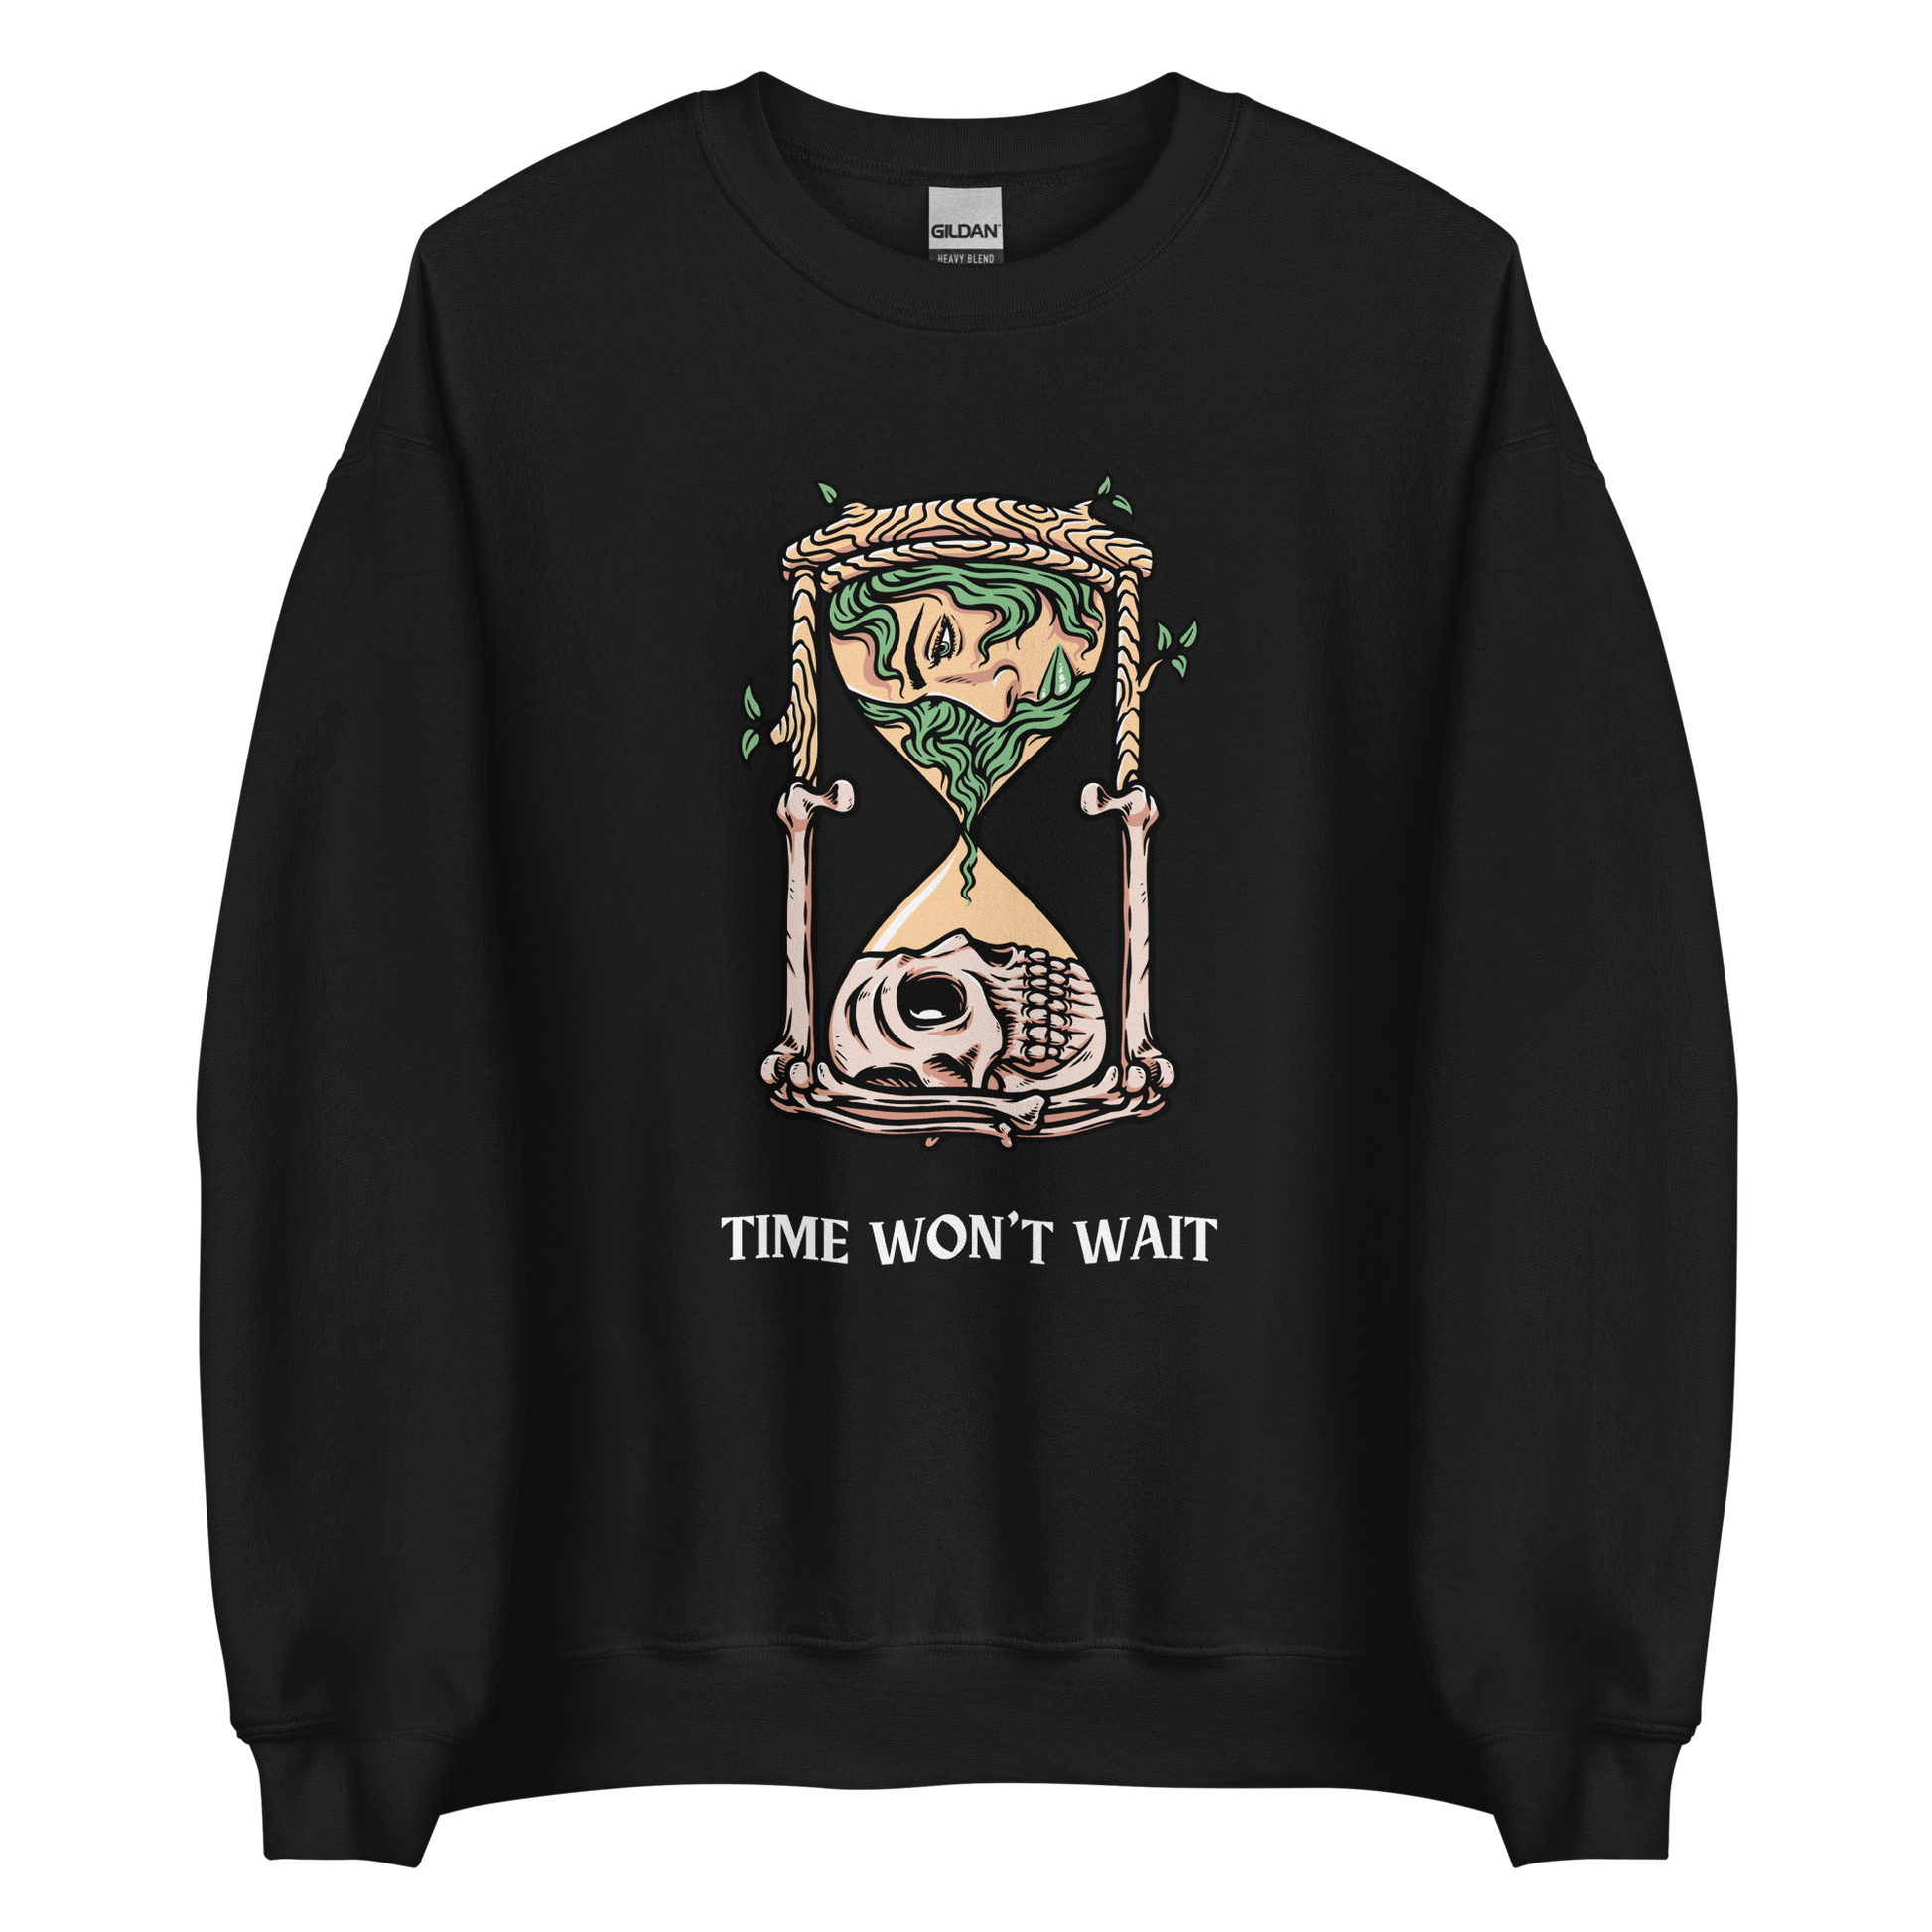 Black Hourglass Sweatshirt featuring a captivating Time Won't Wait graphic on the chest - Cool Graphic Hourglass Sweatshirts - Boozy Fox